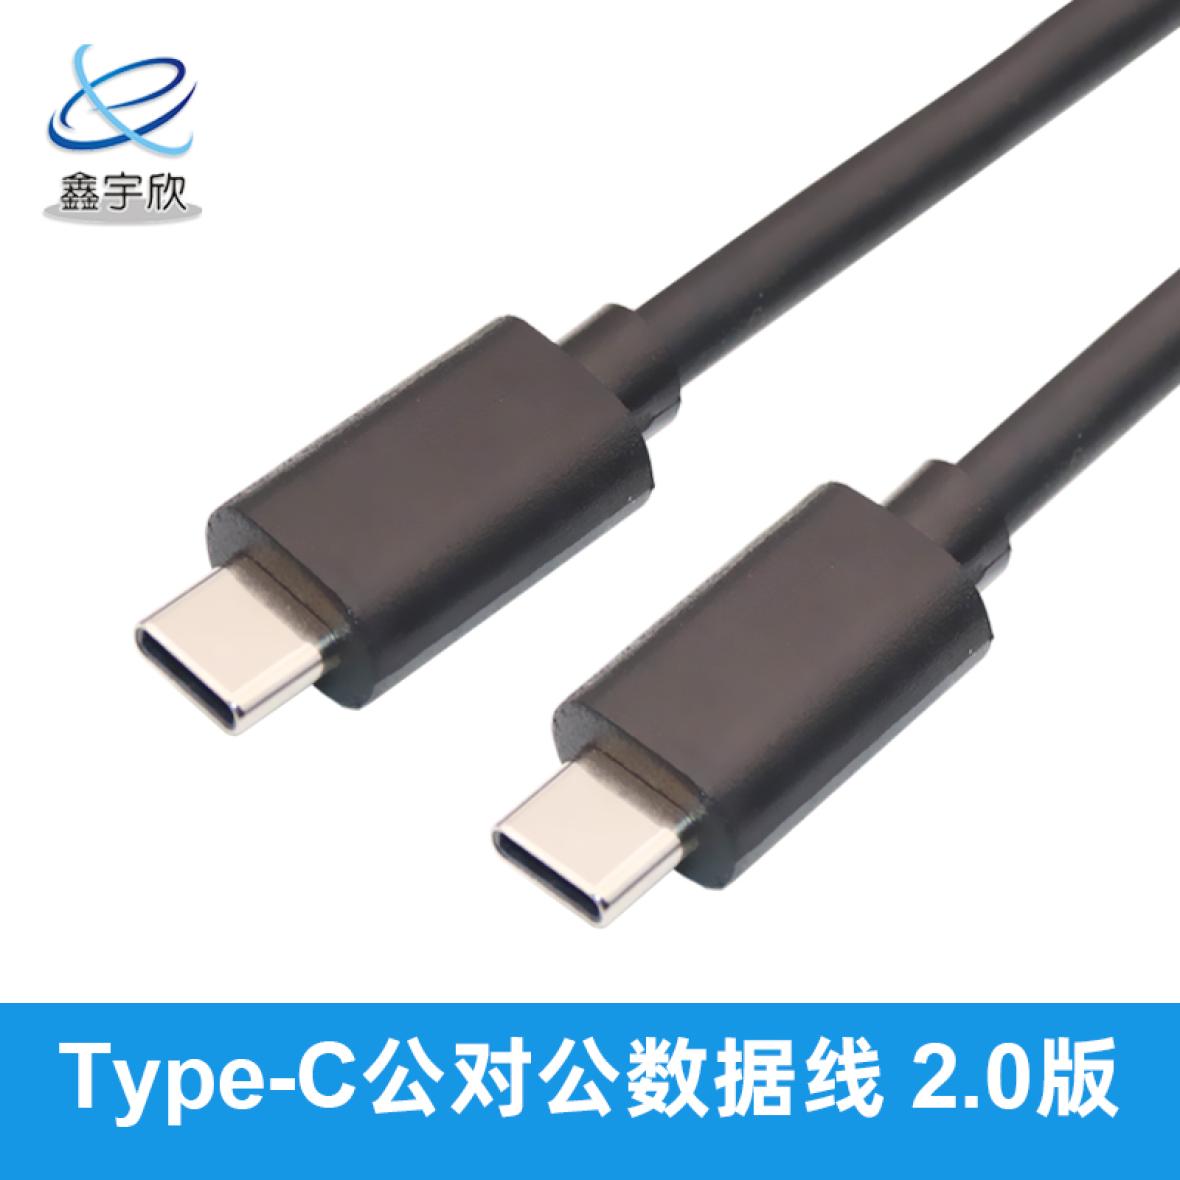  Double-ended Type-C male-to-male data cable version 2.0